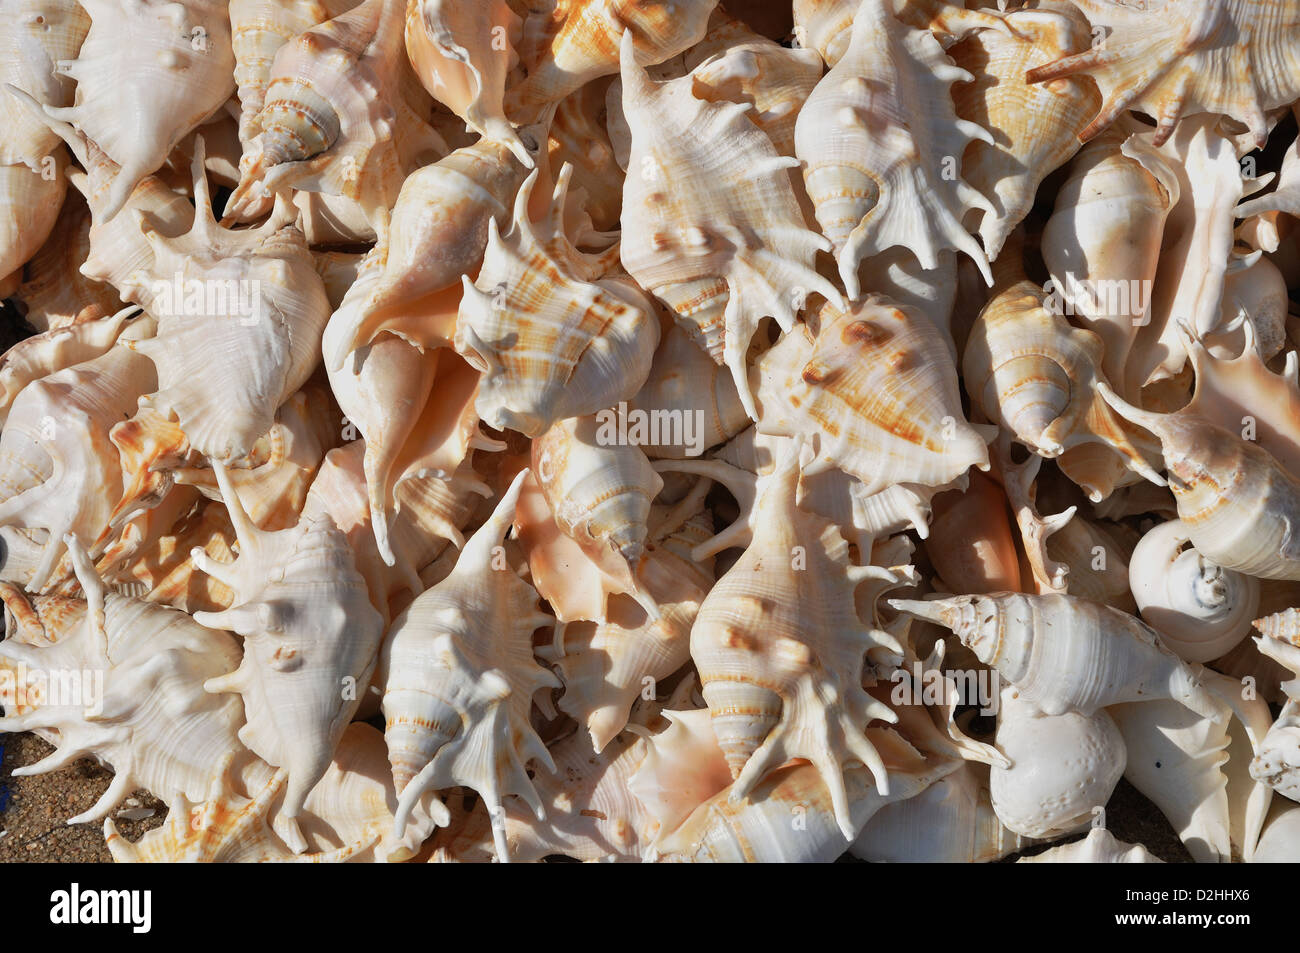 Indian Giant Spider Conch ( Lambis truncata shell ) Stock Photo